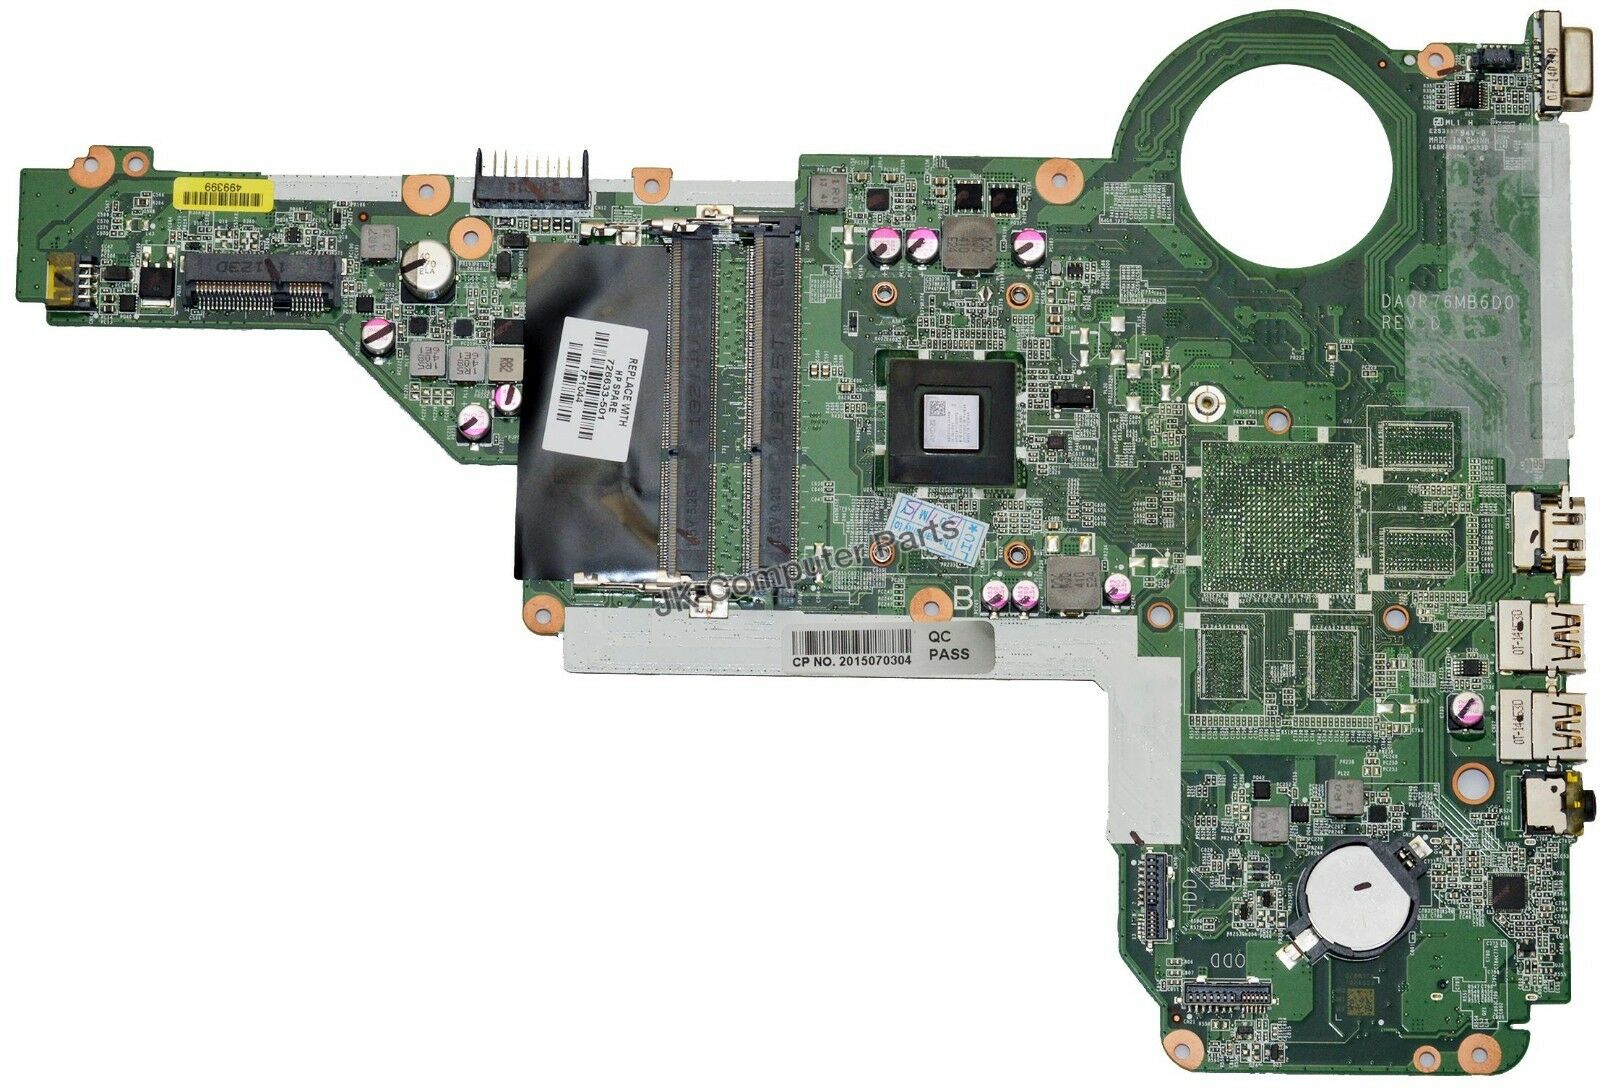 HP Pavilion 17-E Laptop Motherboard w/ AMD A6-5200M 2.0GHz CPU 726633-501 This motherboard is pulled from a